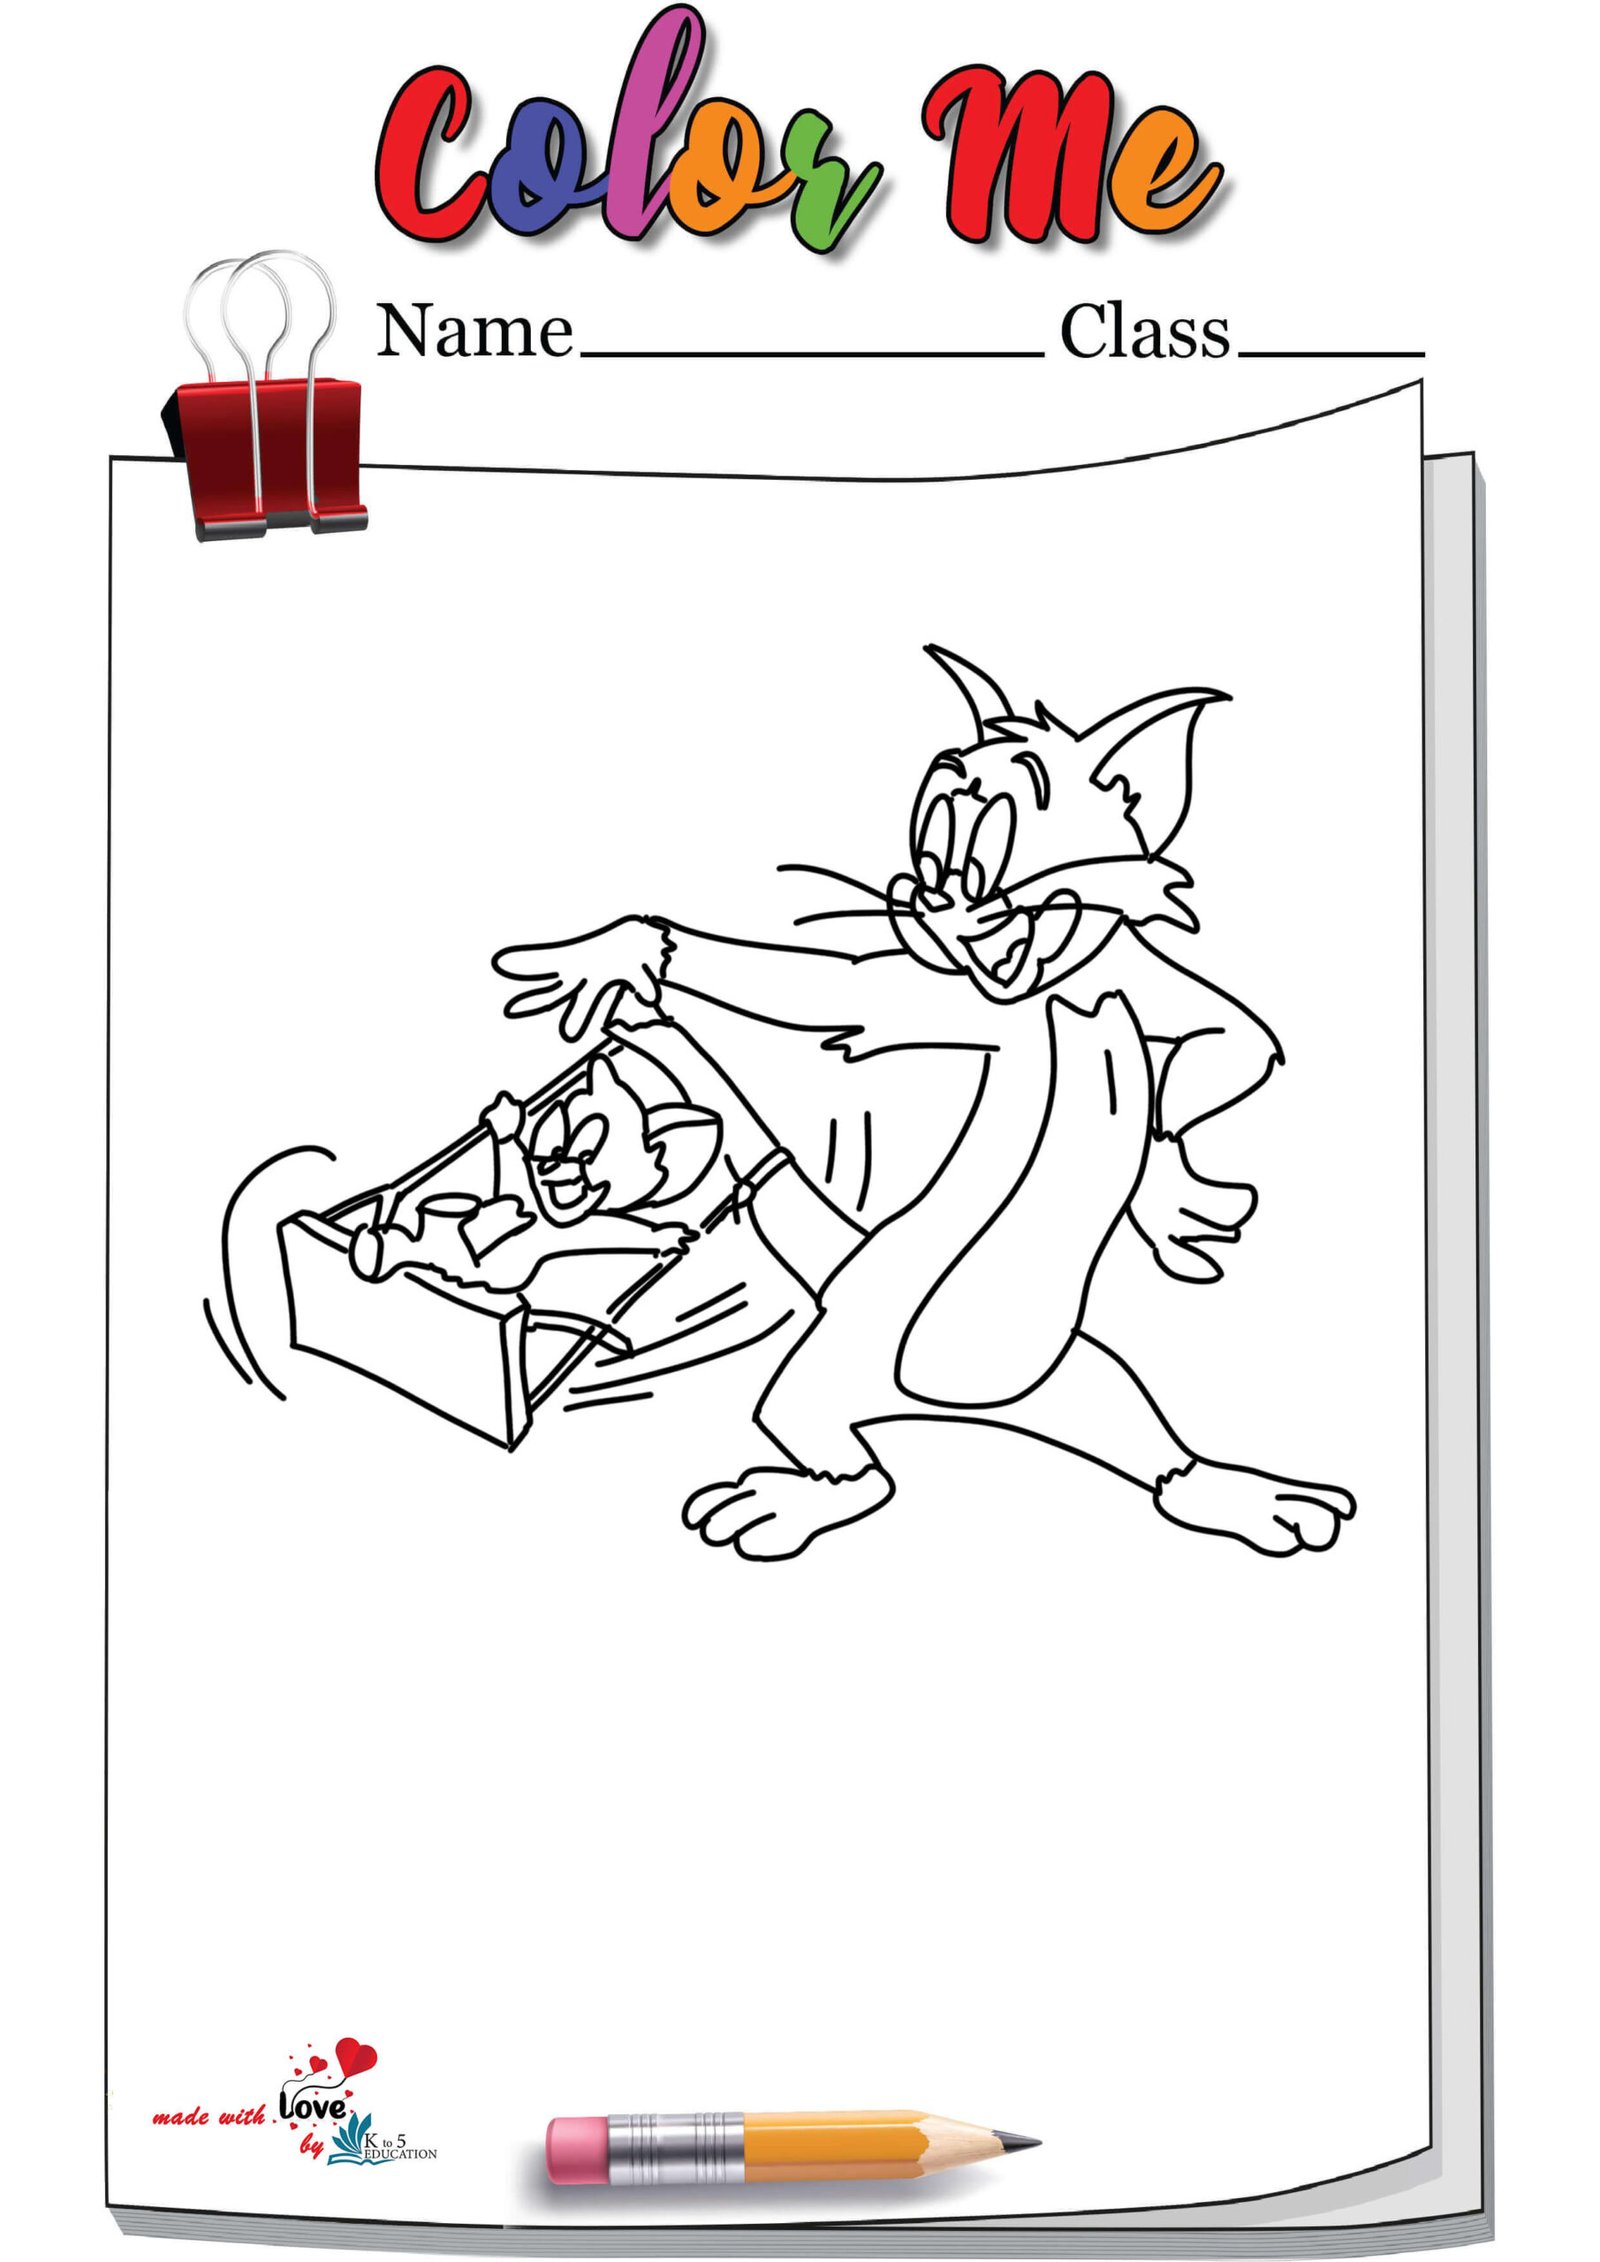 Cartoon Tom And Jerry Playing Coloring Page